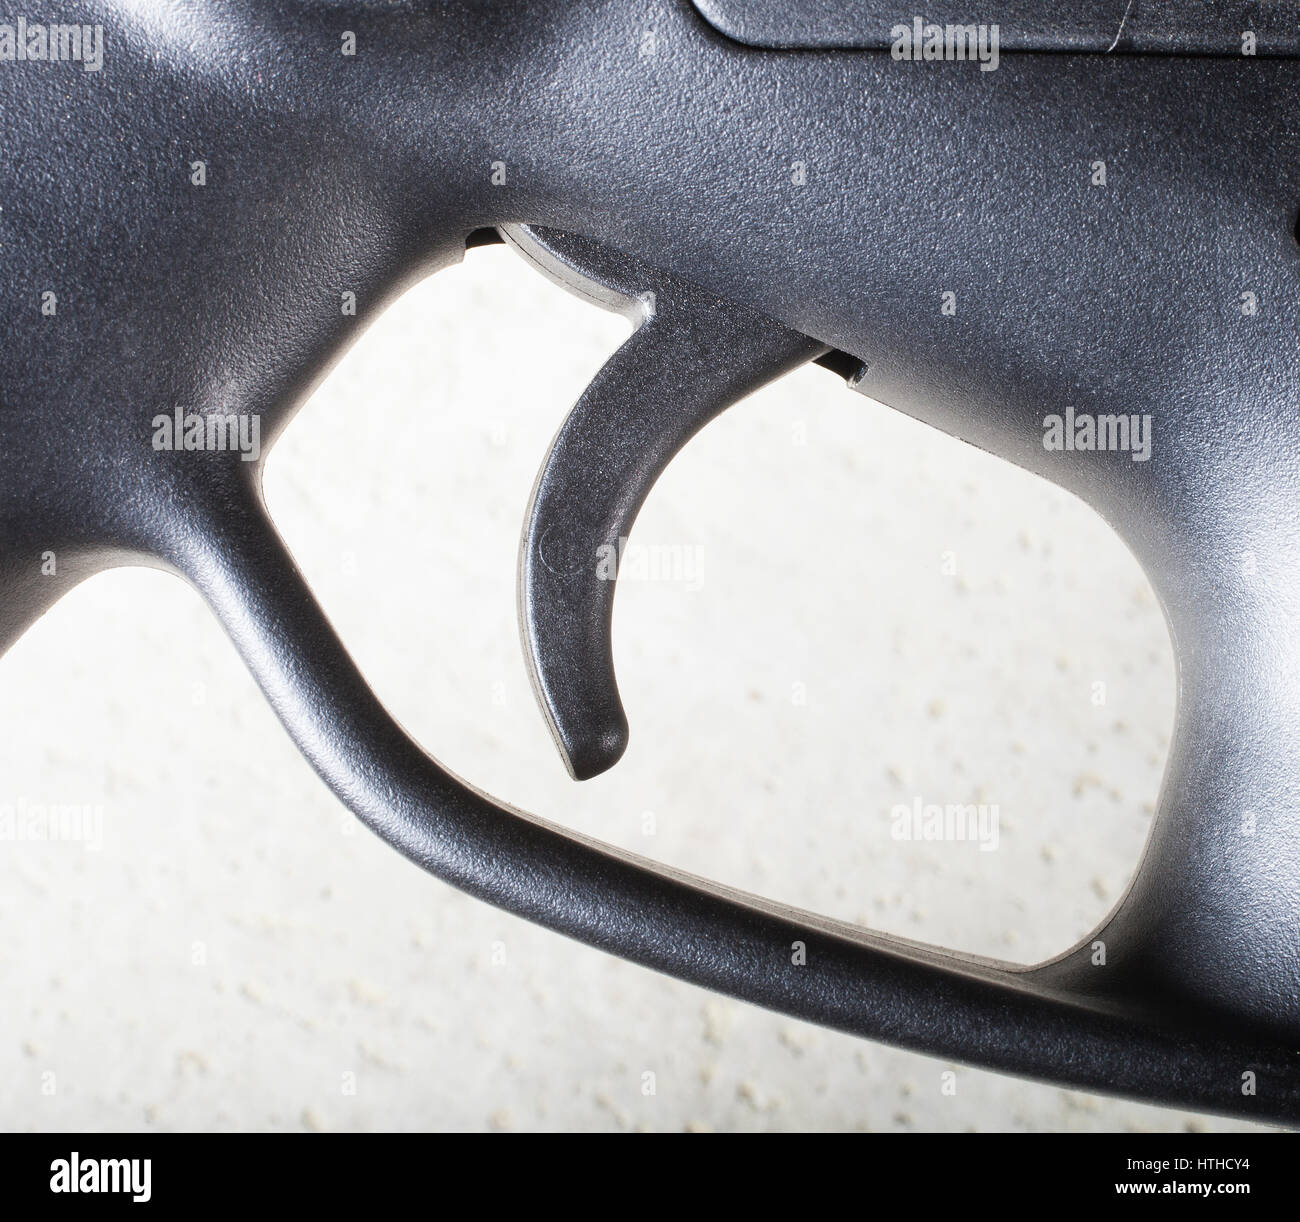 Trigger on a rifle that has a receiver made of polymer Stock Photo